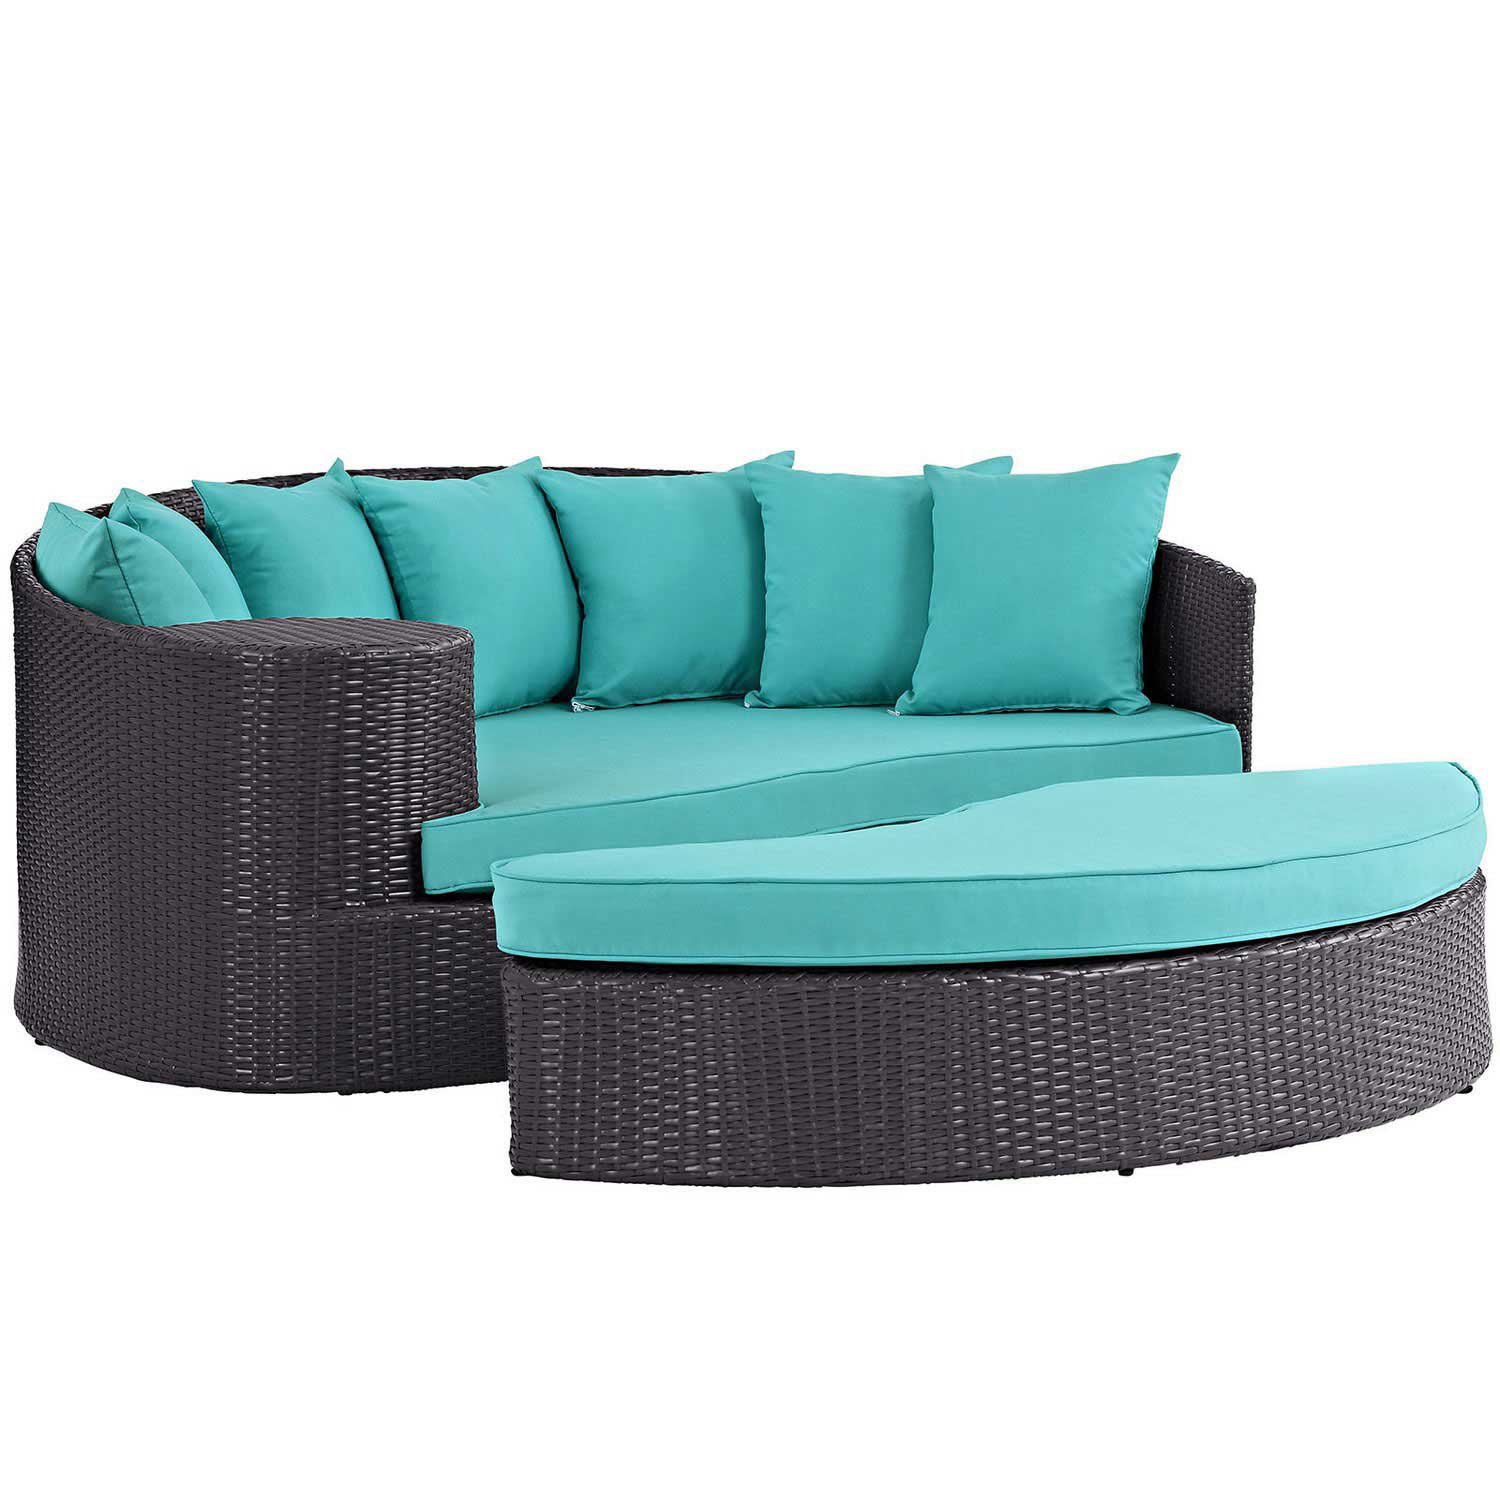 Modway Convene Outdoor Patio Daybed - Espresso Turquoise